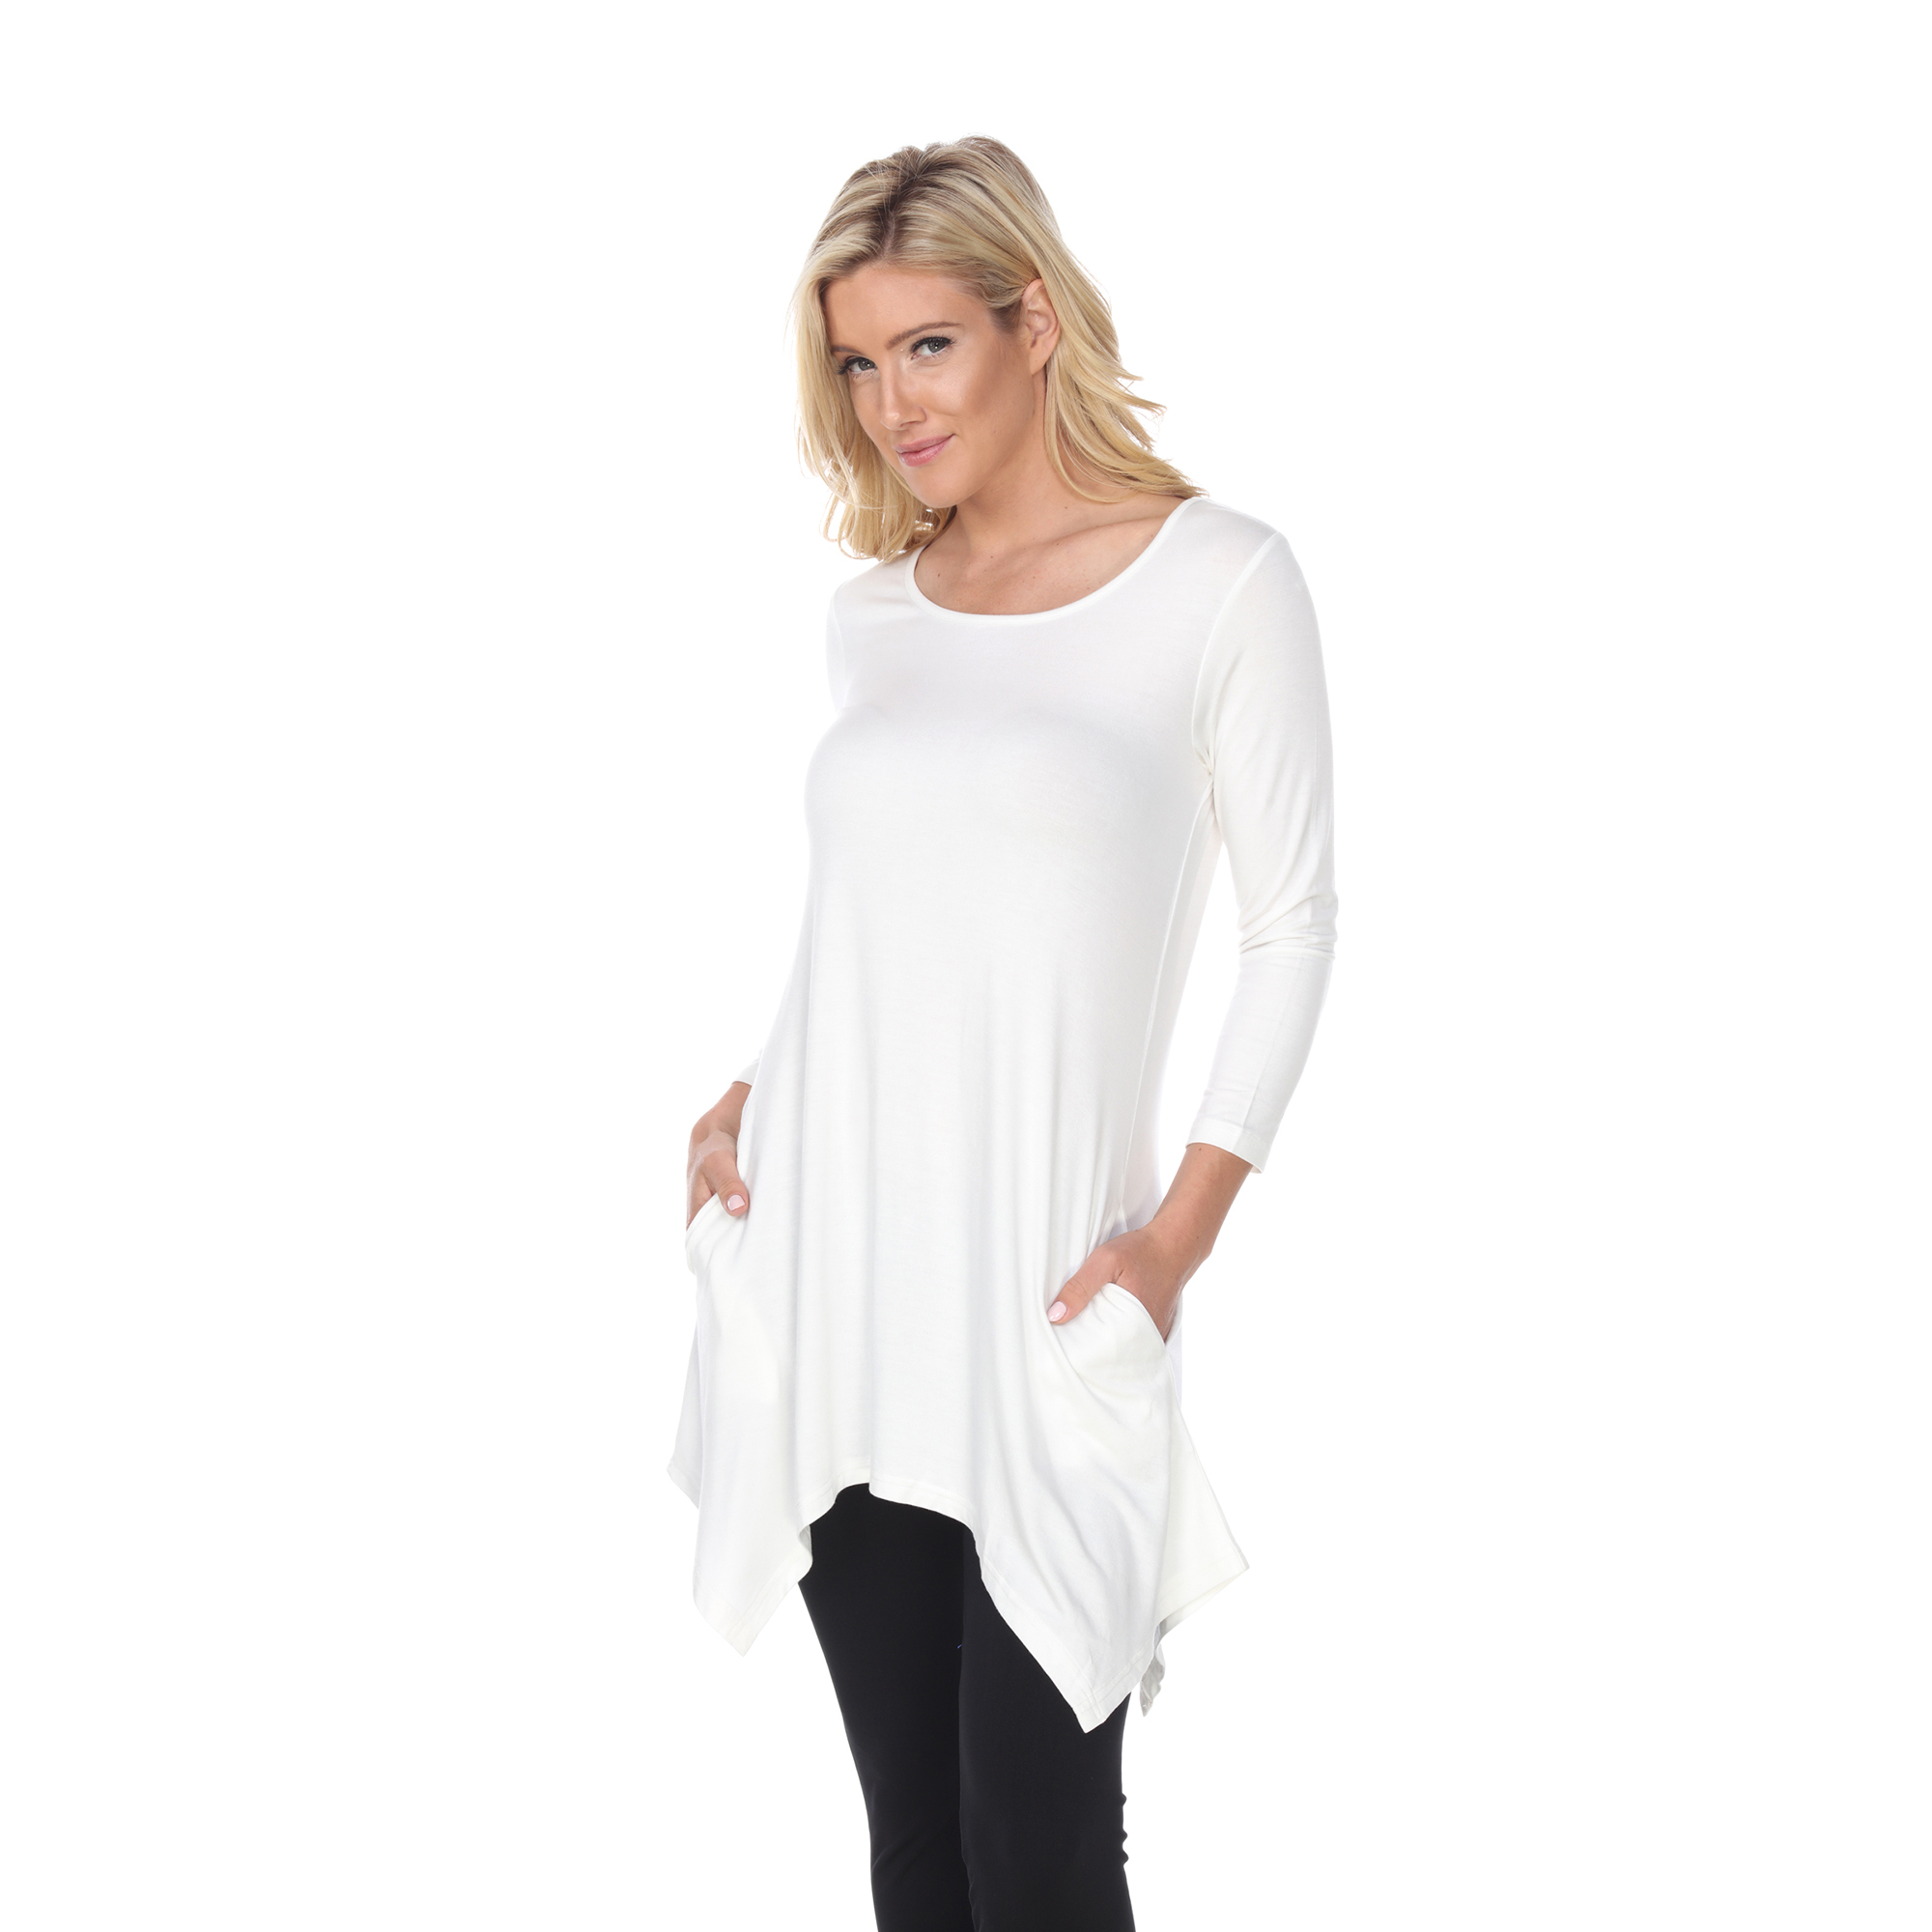 White Mark Women's Quarter Sleeve Tunic Top With Pockets - White, 2X